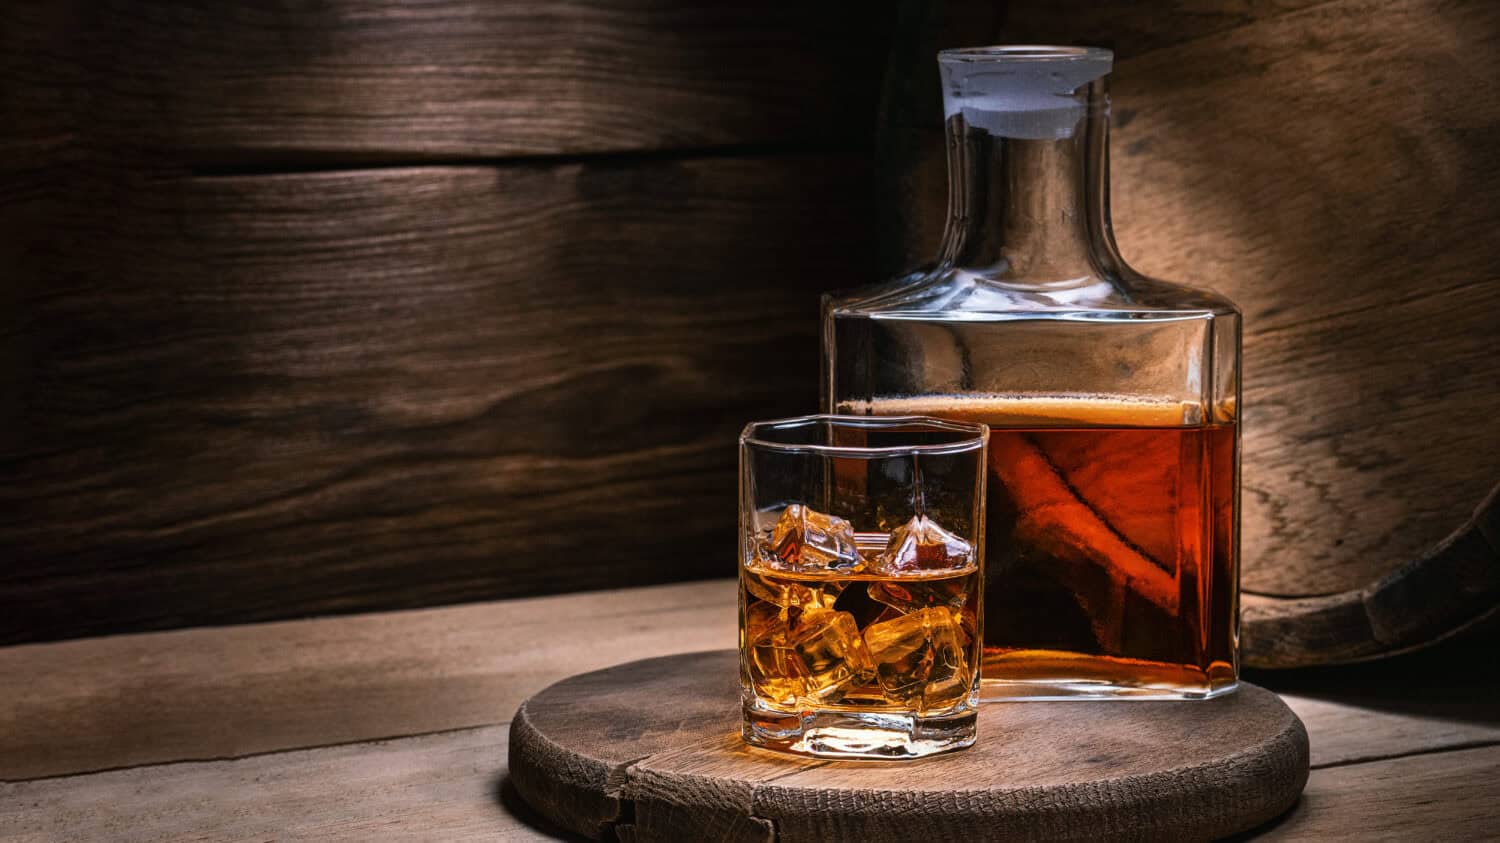 Whiskey drinks. You need to drink whiskey with ice then the whiskey tastes better of an oak barrel. Alcoholic drink with ice whiskey or cognac close-up on an oak coaster for glasses for spirits.